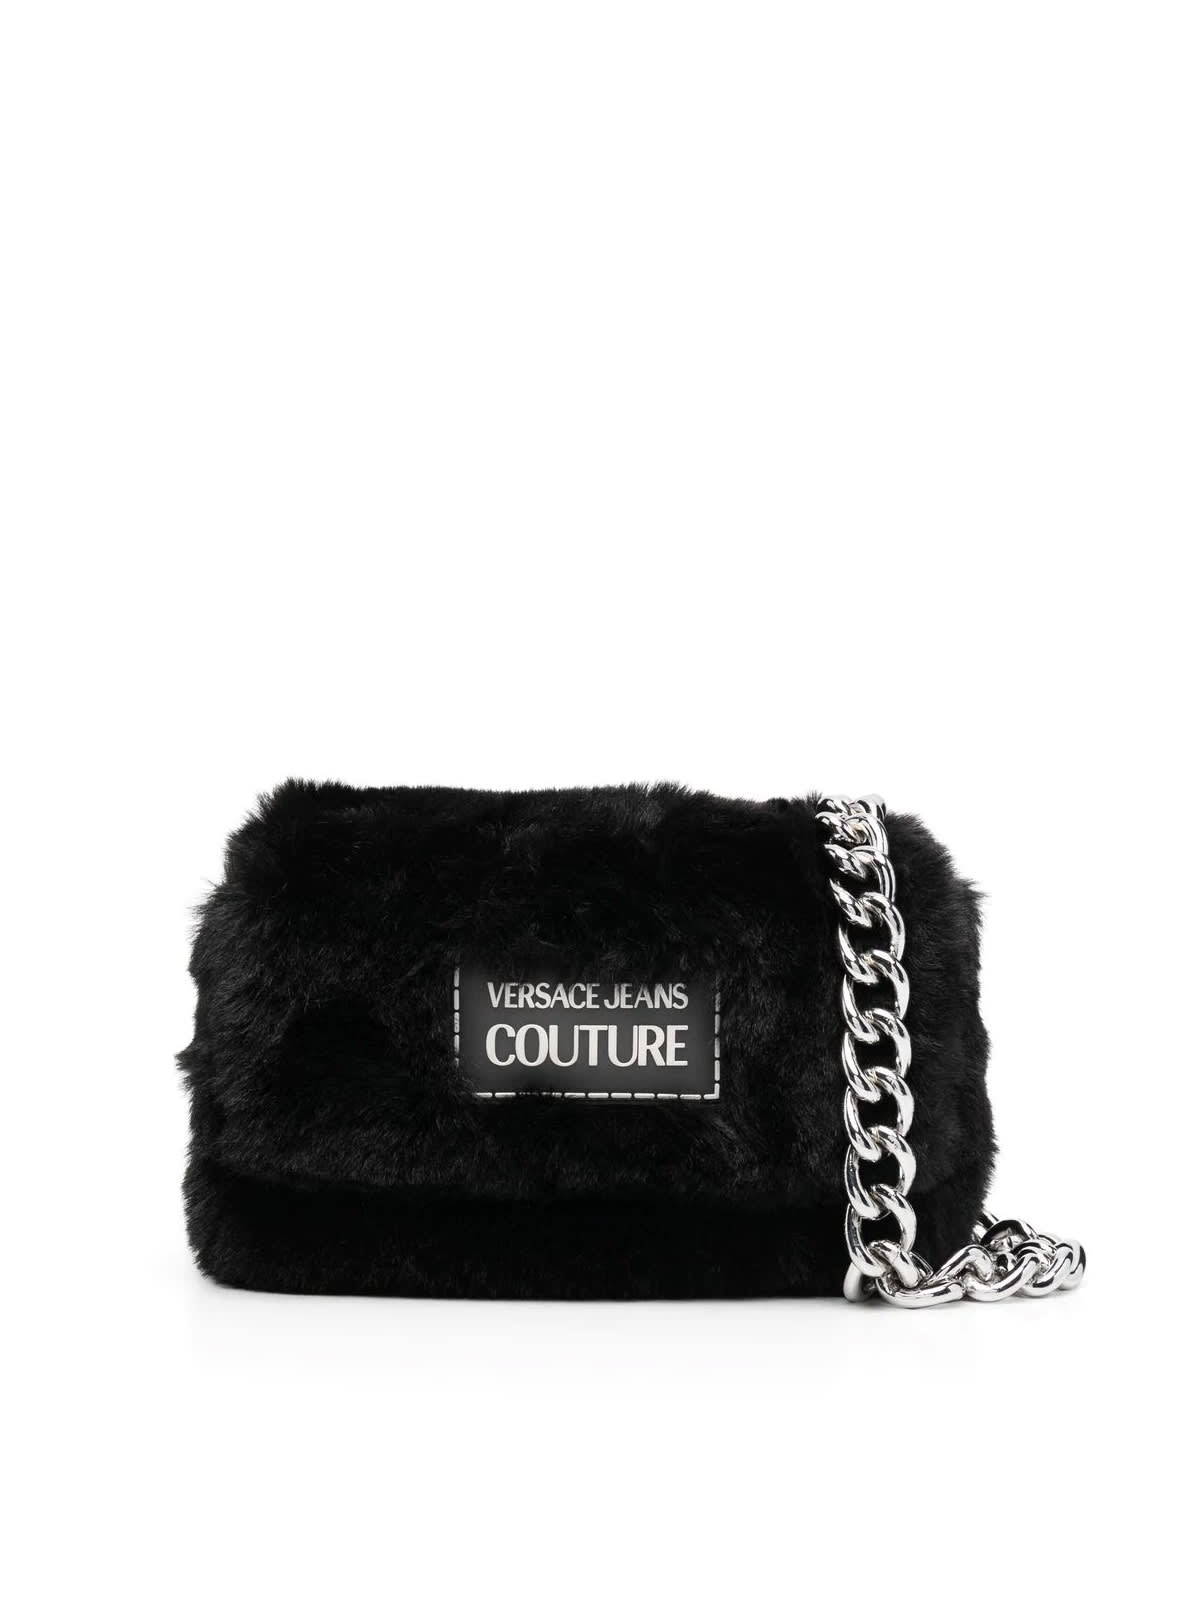 Versace Jeans Couture Range B Fluffy Bag Synthetic Fur Crossbody Bag